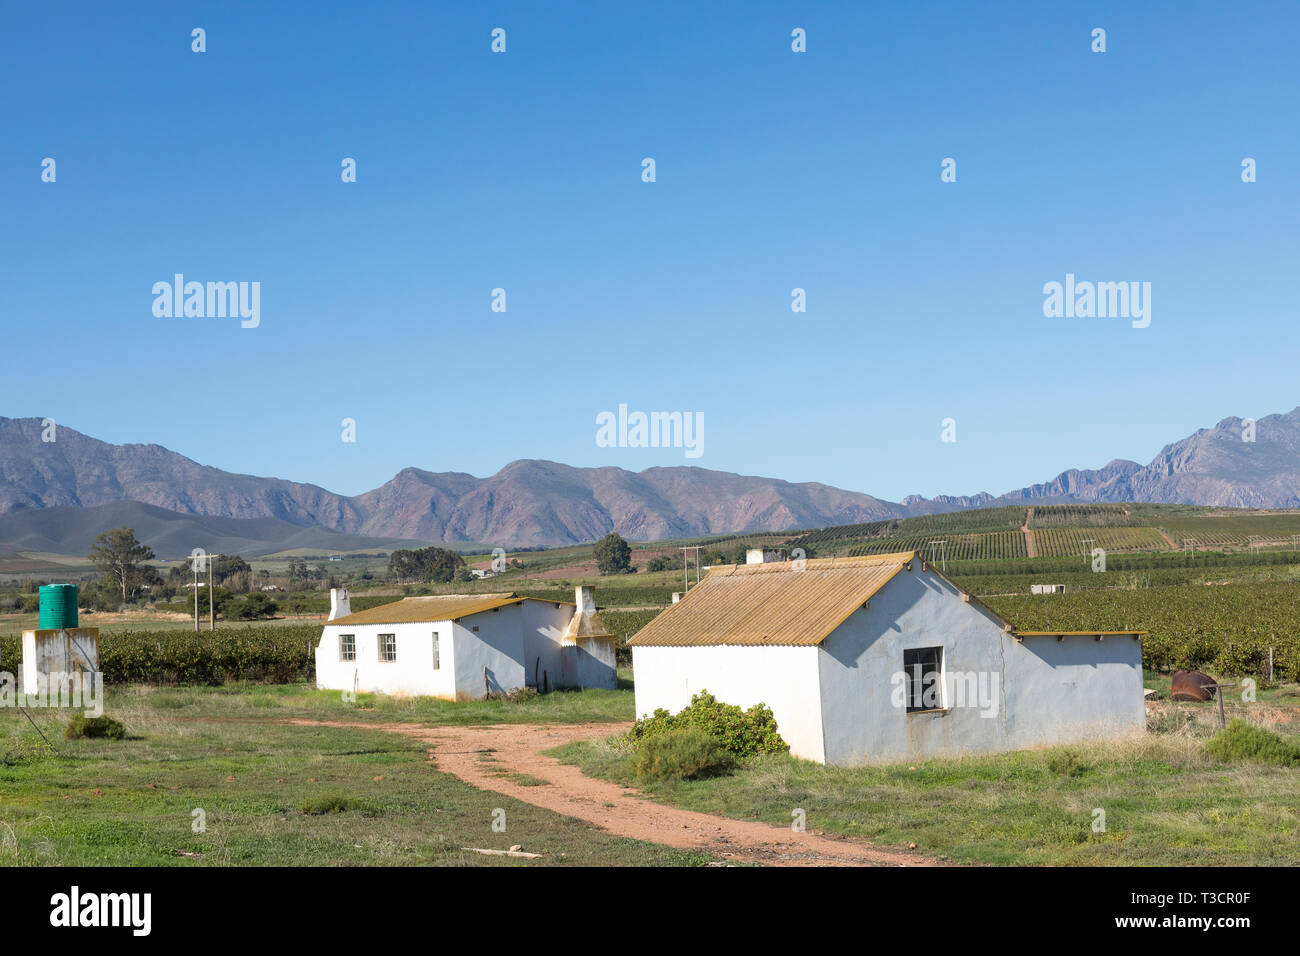 Farm workers cottages  with outdoor ablutions in the Robertson Wine Valley with Langeberg Mountains, Klaasvoogds, Western Cape Winelands, South Africa Stock Photo